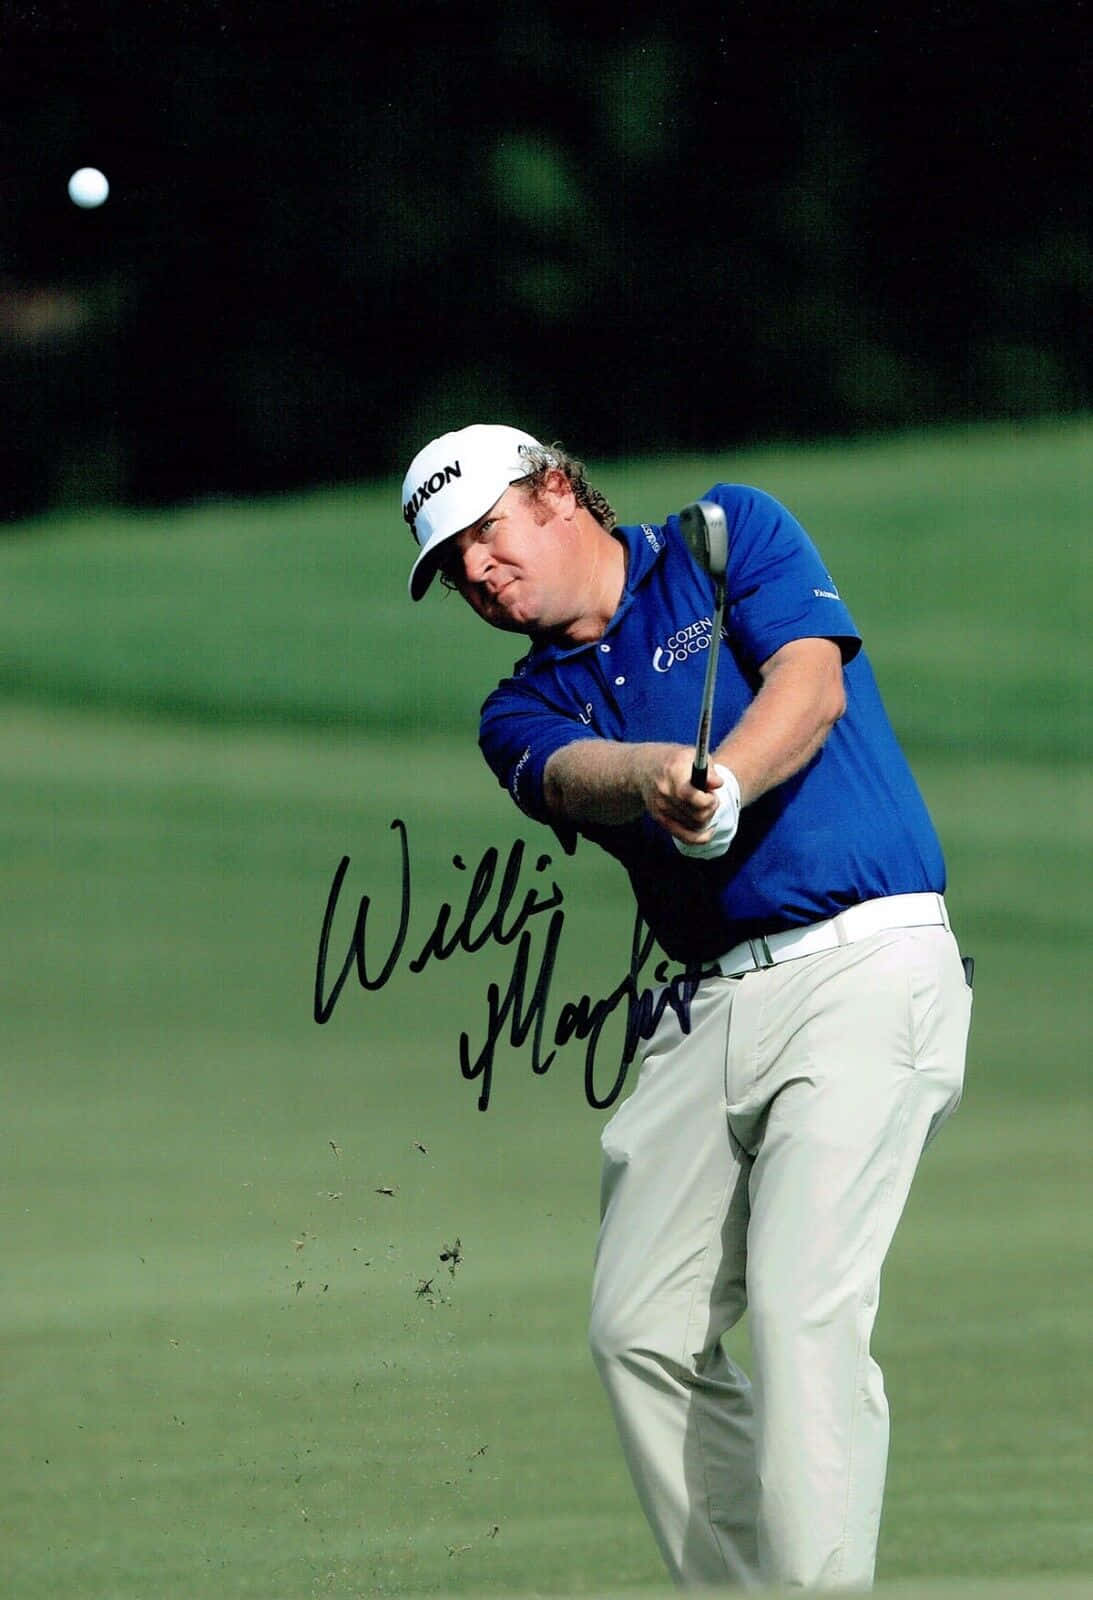 William Mcgirt Photo With Sign Wallpaper